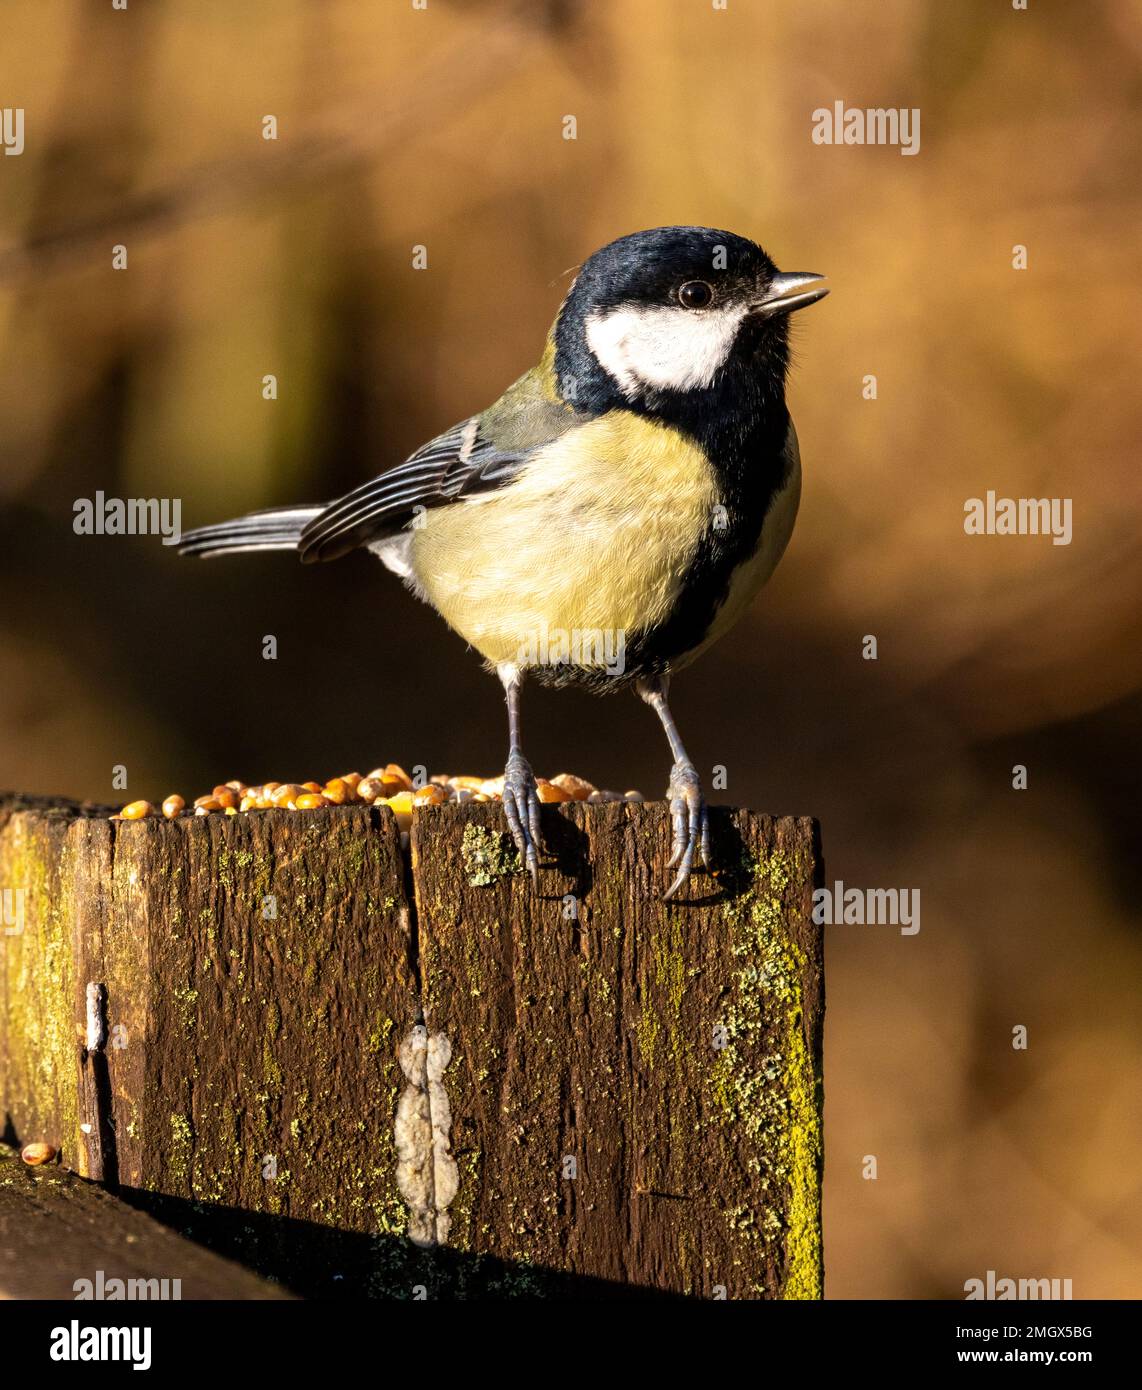 The Great Tit is the largest of the Tit family in UK. They often fly around in mixed feeding flocks with other species, but they are domineering Stock Photo